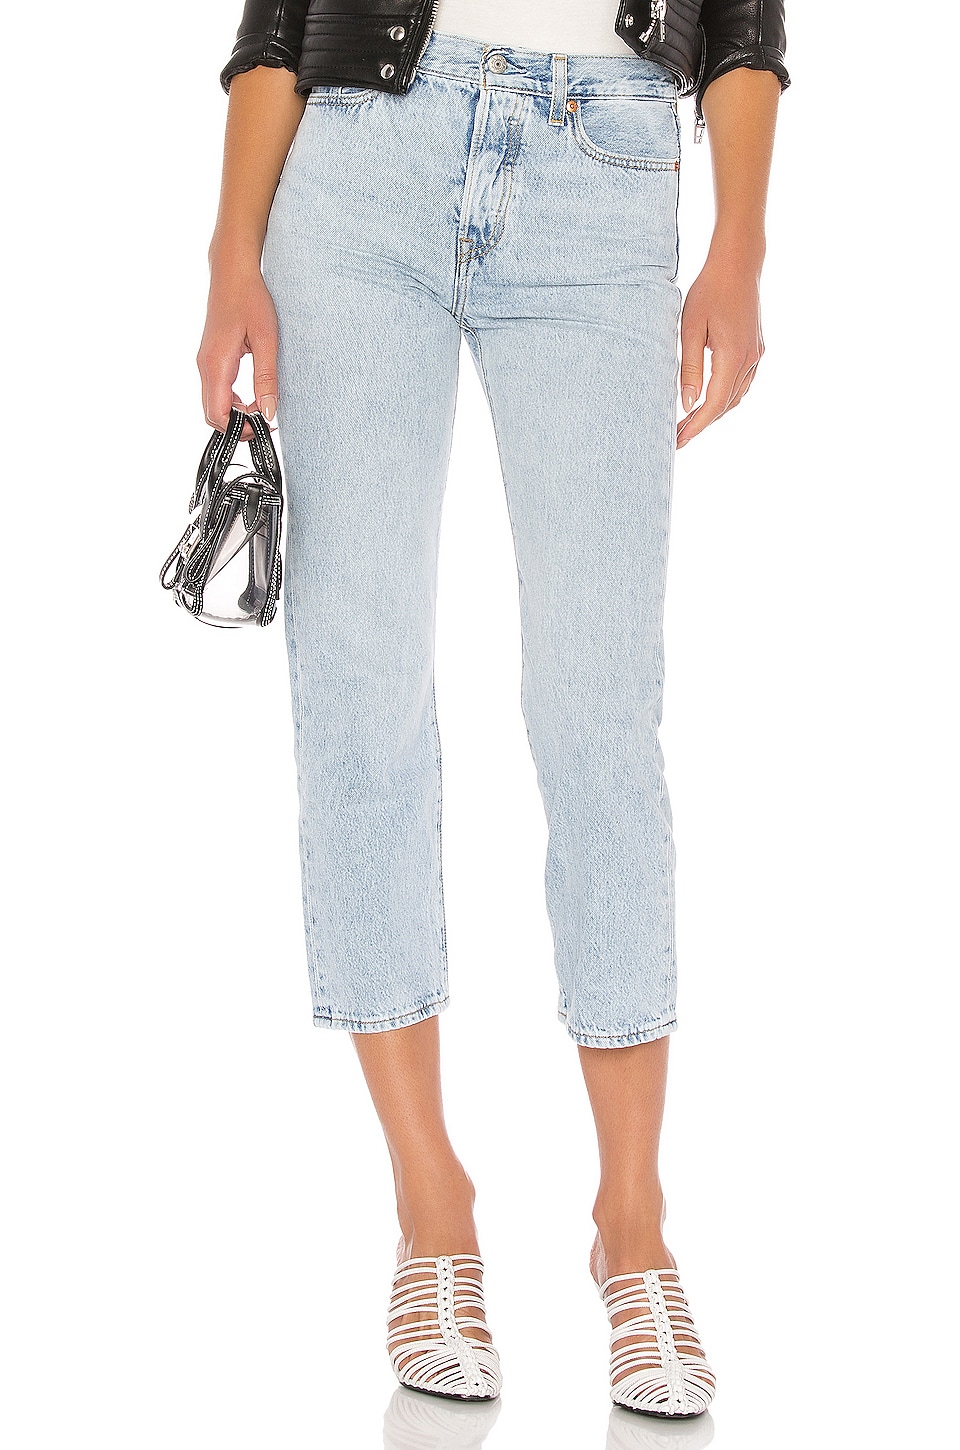 LEVI'S Wedgie Straight in Montgomery Baked | REVOLVE